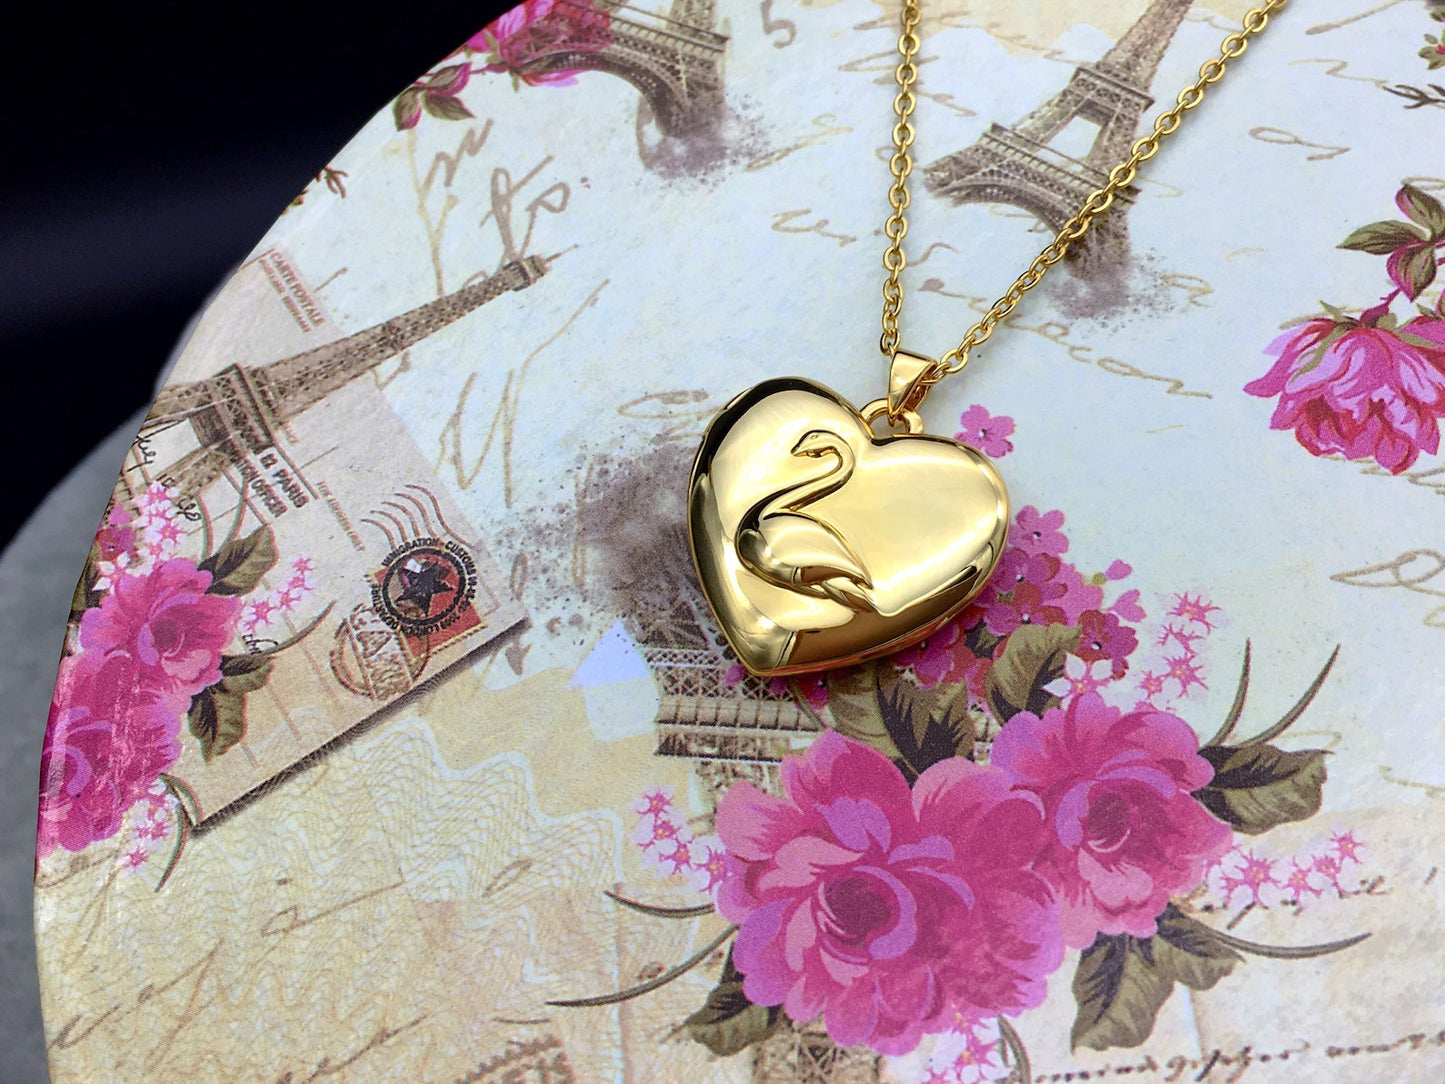 Princess Odette Necklace Openable Heart Pendant Swan The Spell of the Lake Locket Photo Frame B- GRADE